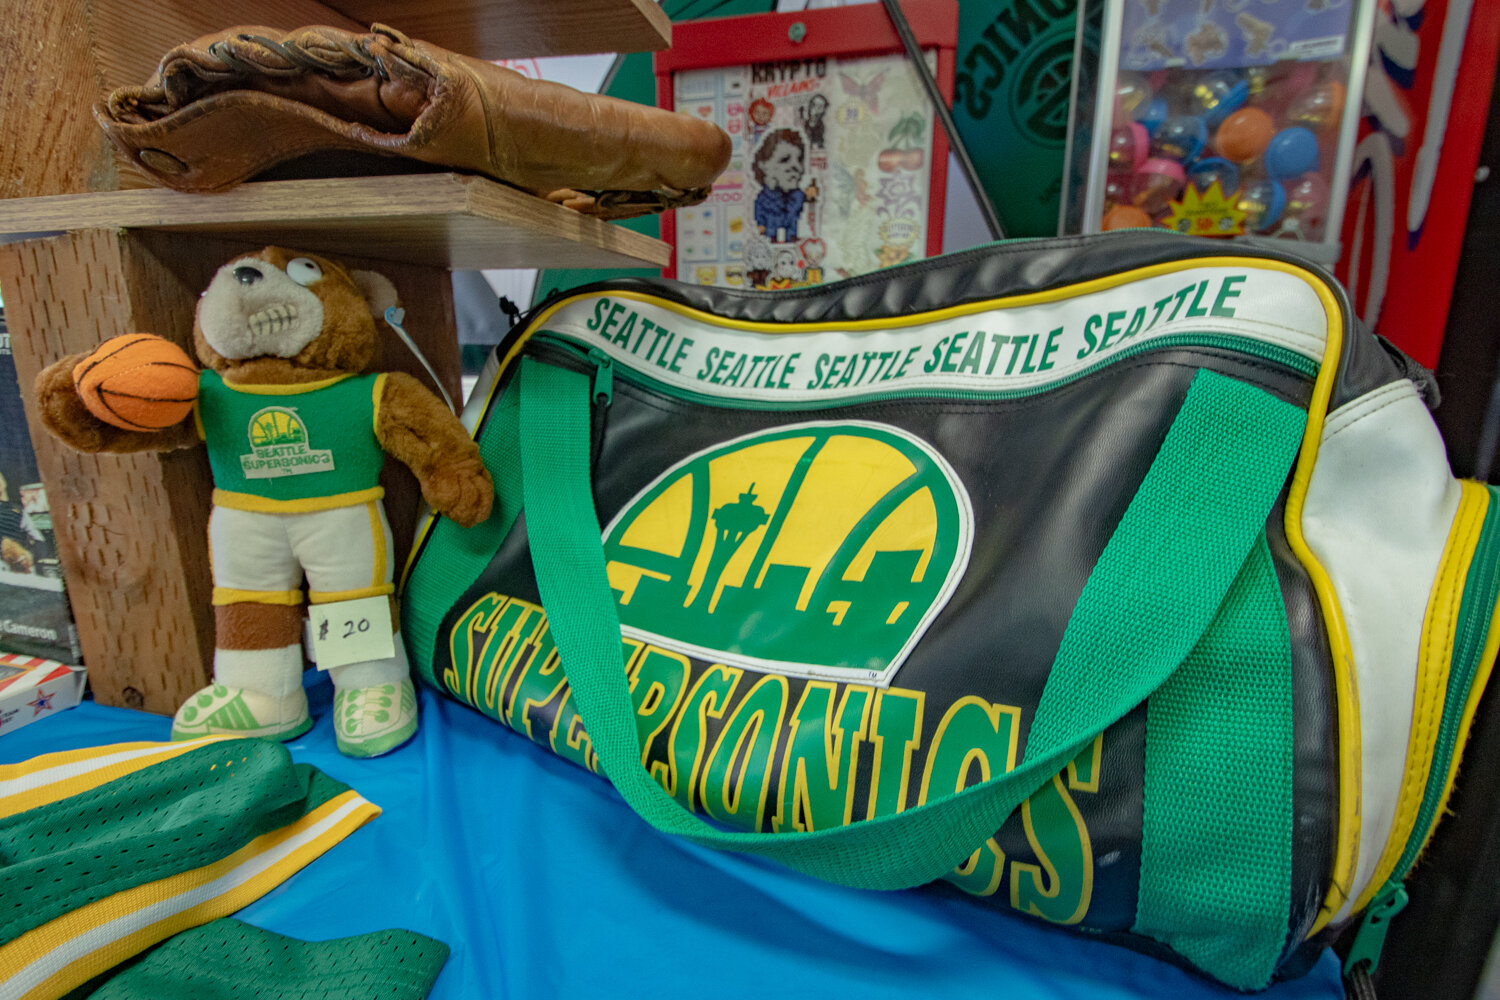 Seattle Supersonics gear is for sale on Saturday, Sept. 2 at the first Keiper's Cards and Memorabilia Show at the Tower Mall, located at 320 N. Tower Ave. in Centralia.